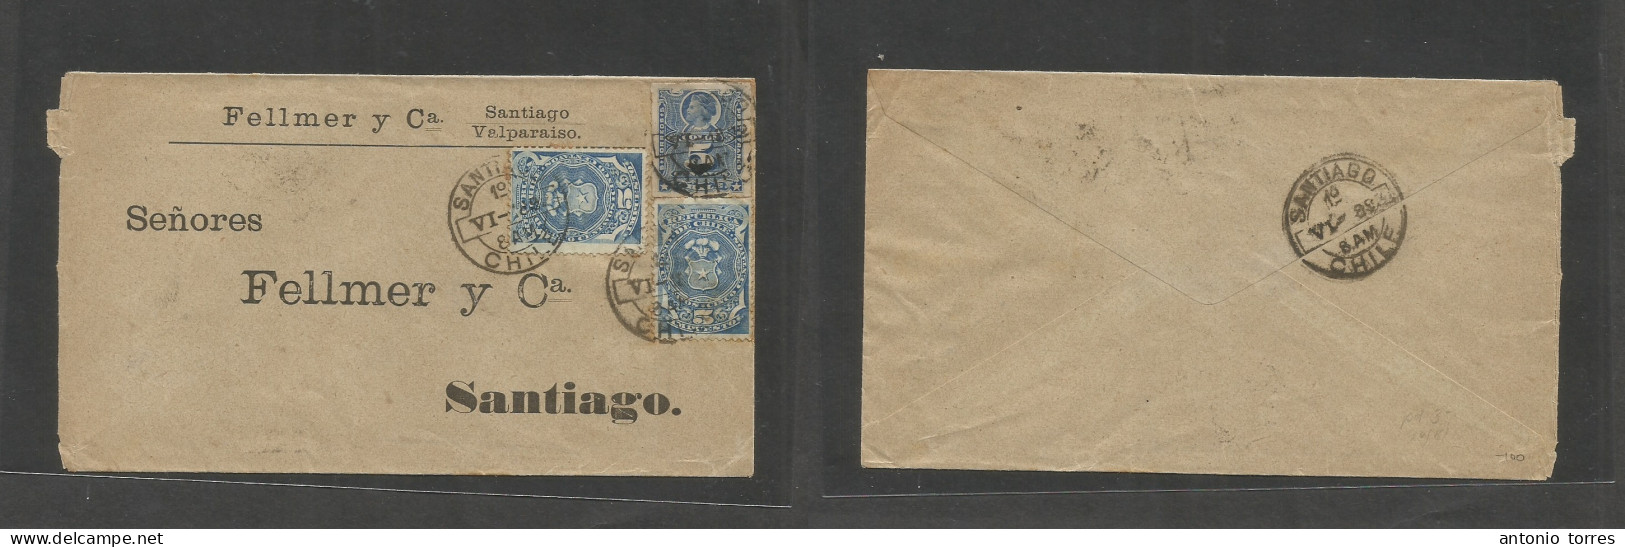 Chile. 1897 (1 June) Santiago Local Usage. Provisional Period Fiscal Used As Postage. 5c Blue (x2 + 5c Mns) At 15c Rate. - Chile